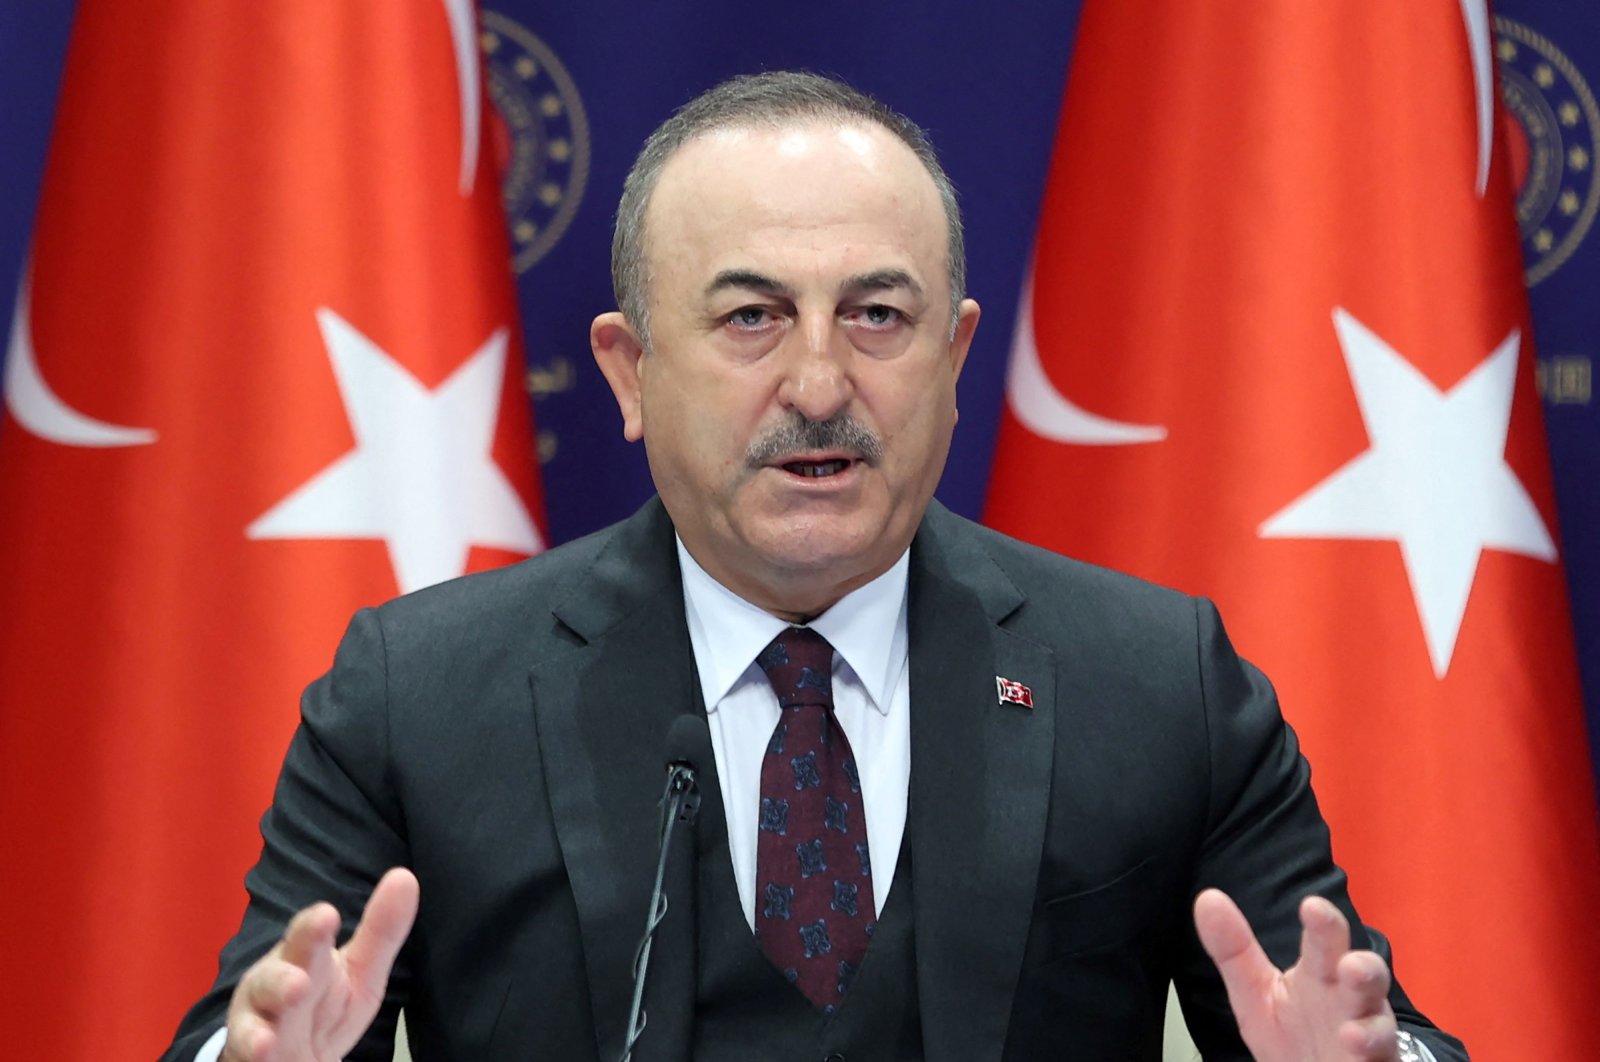 Turkish Foreign Minister Mevlut Cavusoglu addresses a press conference at the Ministry of Foreign Affairs in Ankara, Dec. 27, 2021. (Photo by Adem ALTAN / AFP)